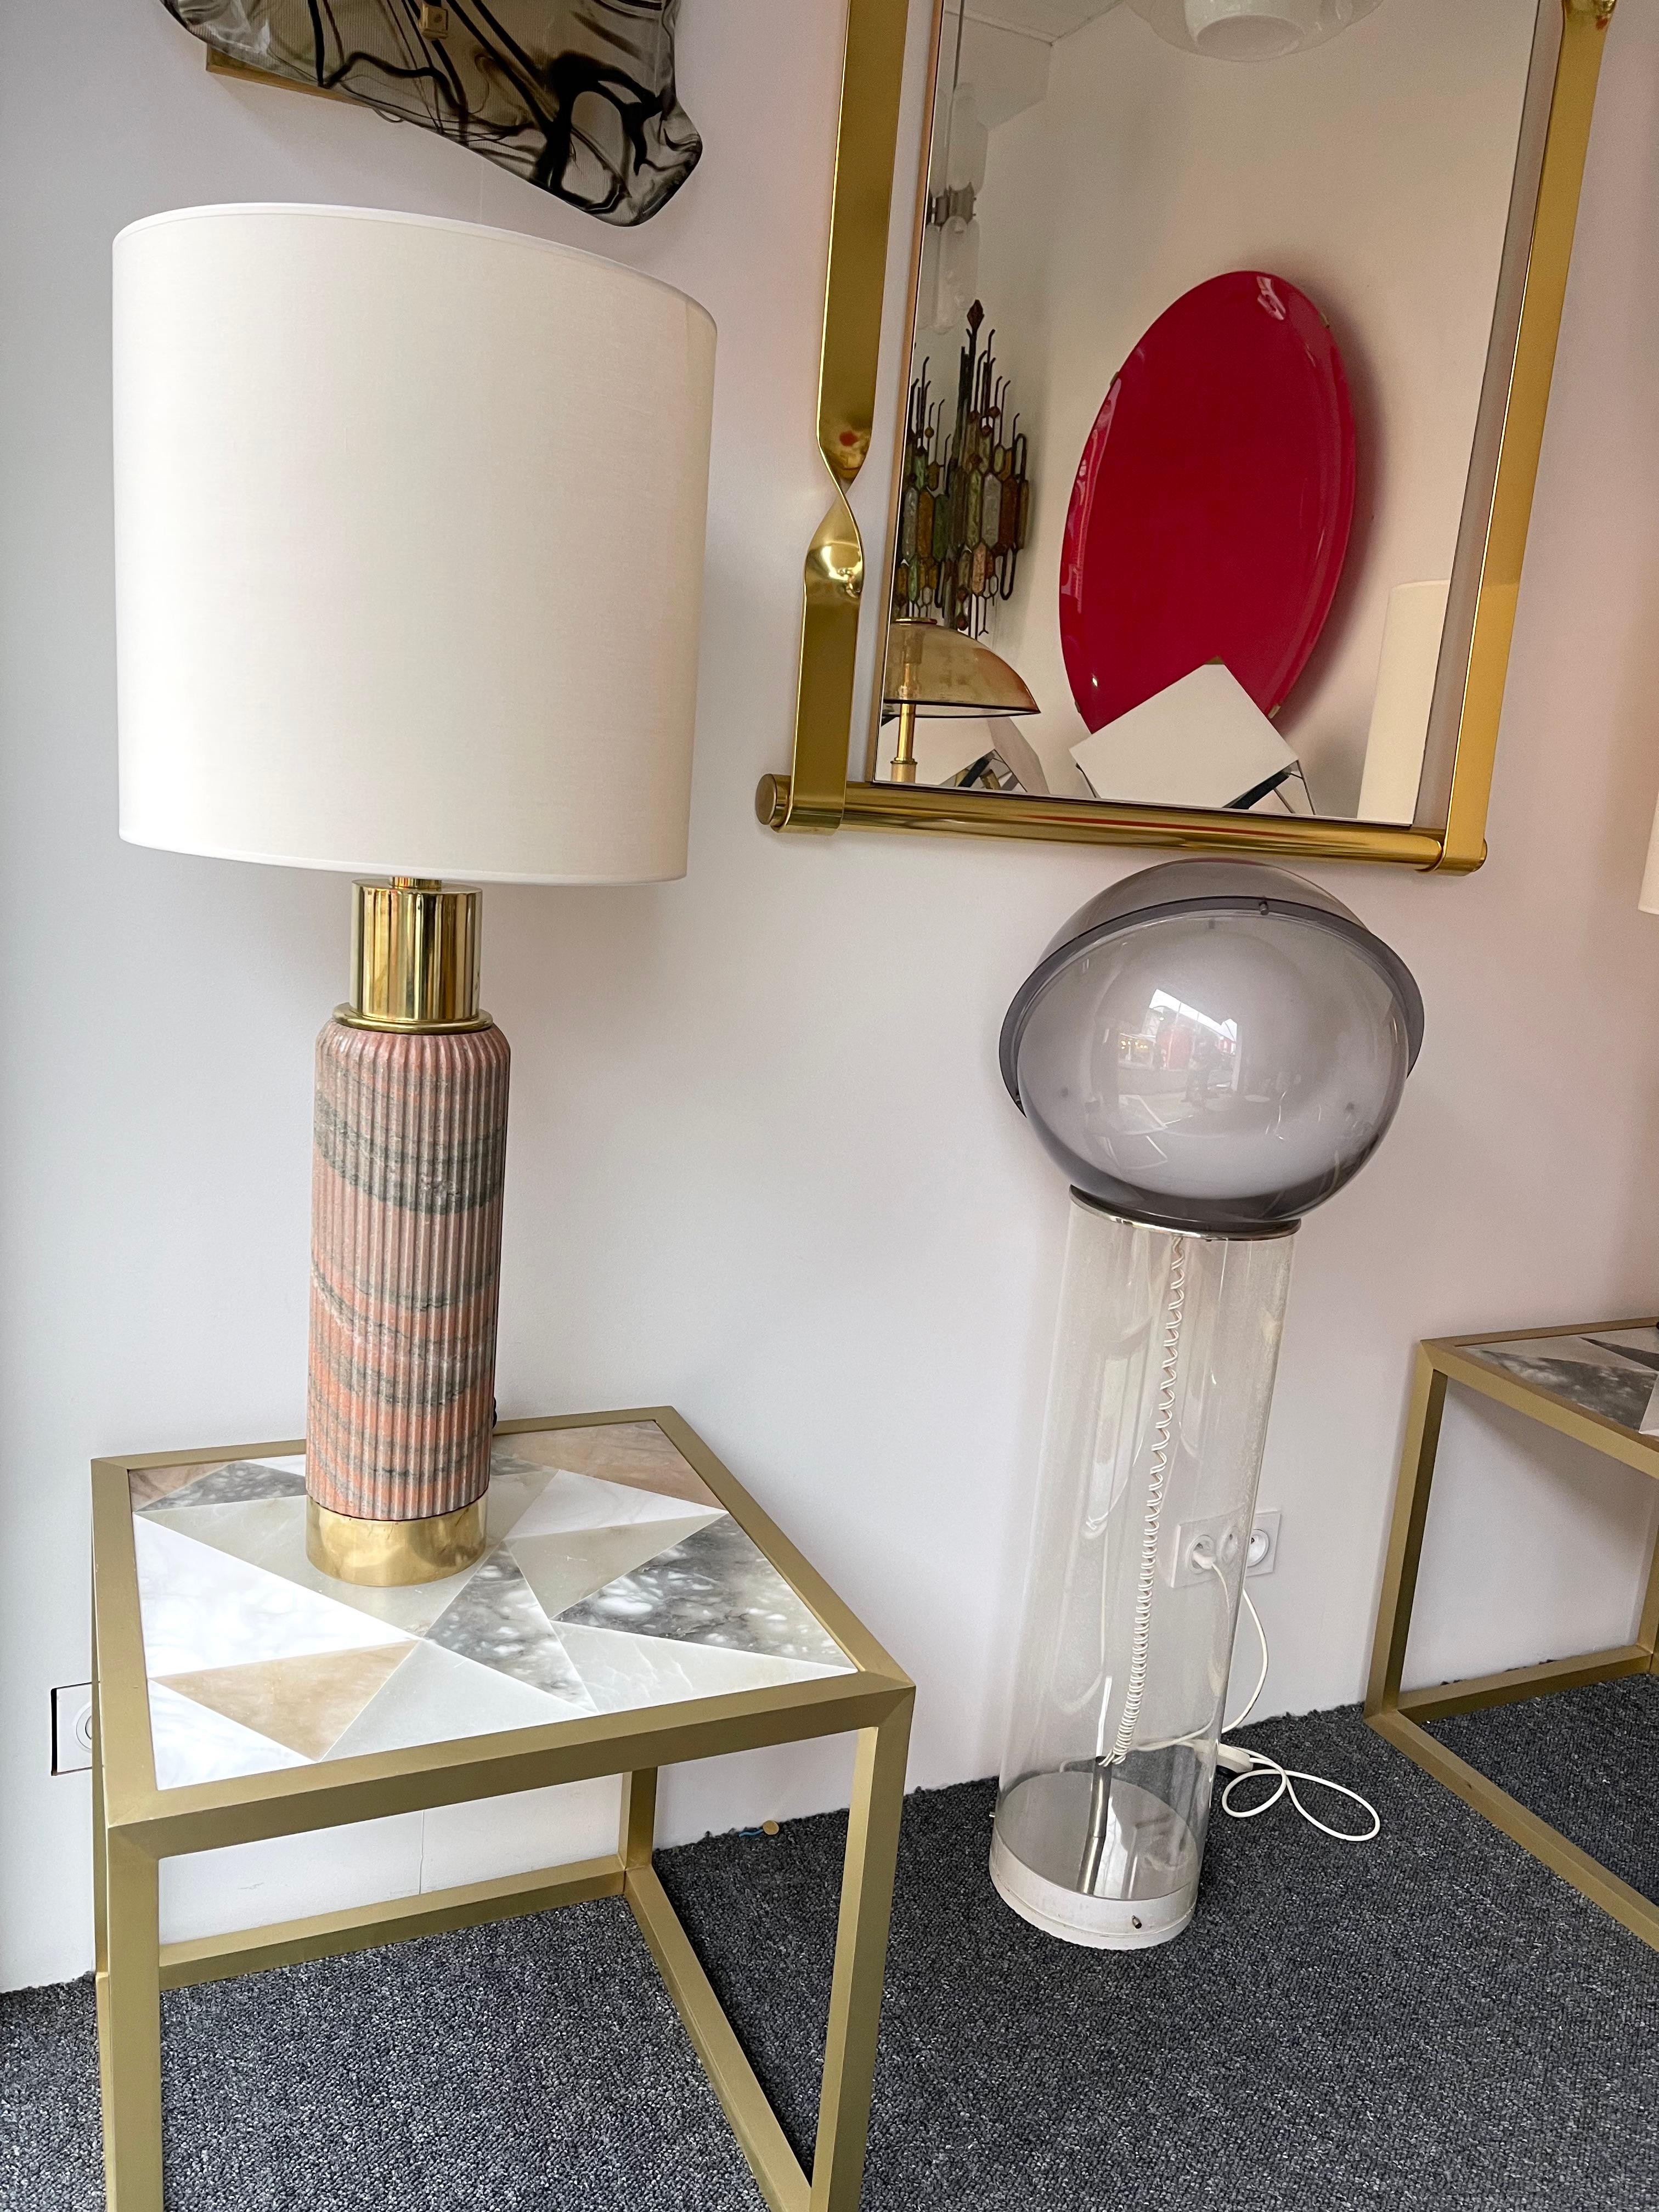 Pair of contemporary table or bedside lamps brass and massive body in pink granite stone a variant like marble or travertine. Few exclusive production from a small italian design workshop. In the style of Mazzega, Veronese, Poliarte, Venini,